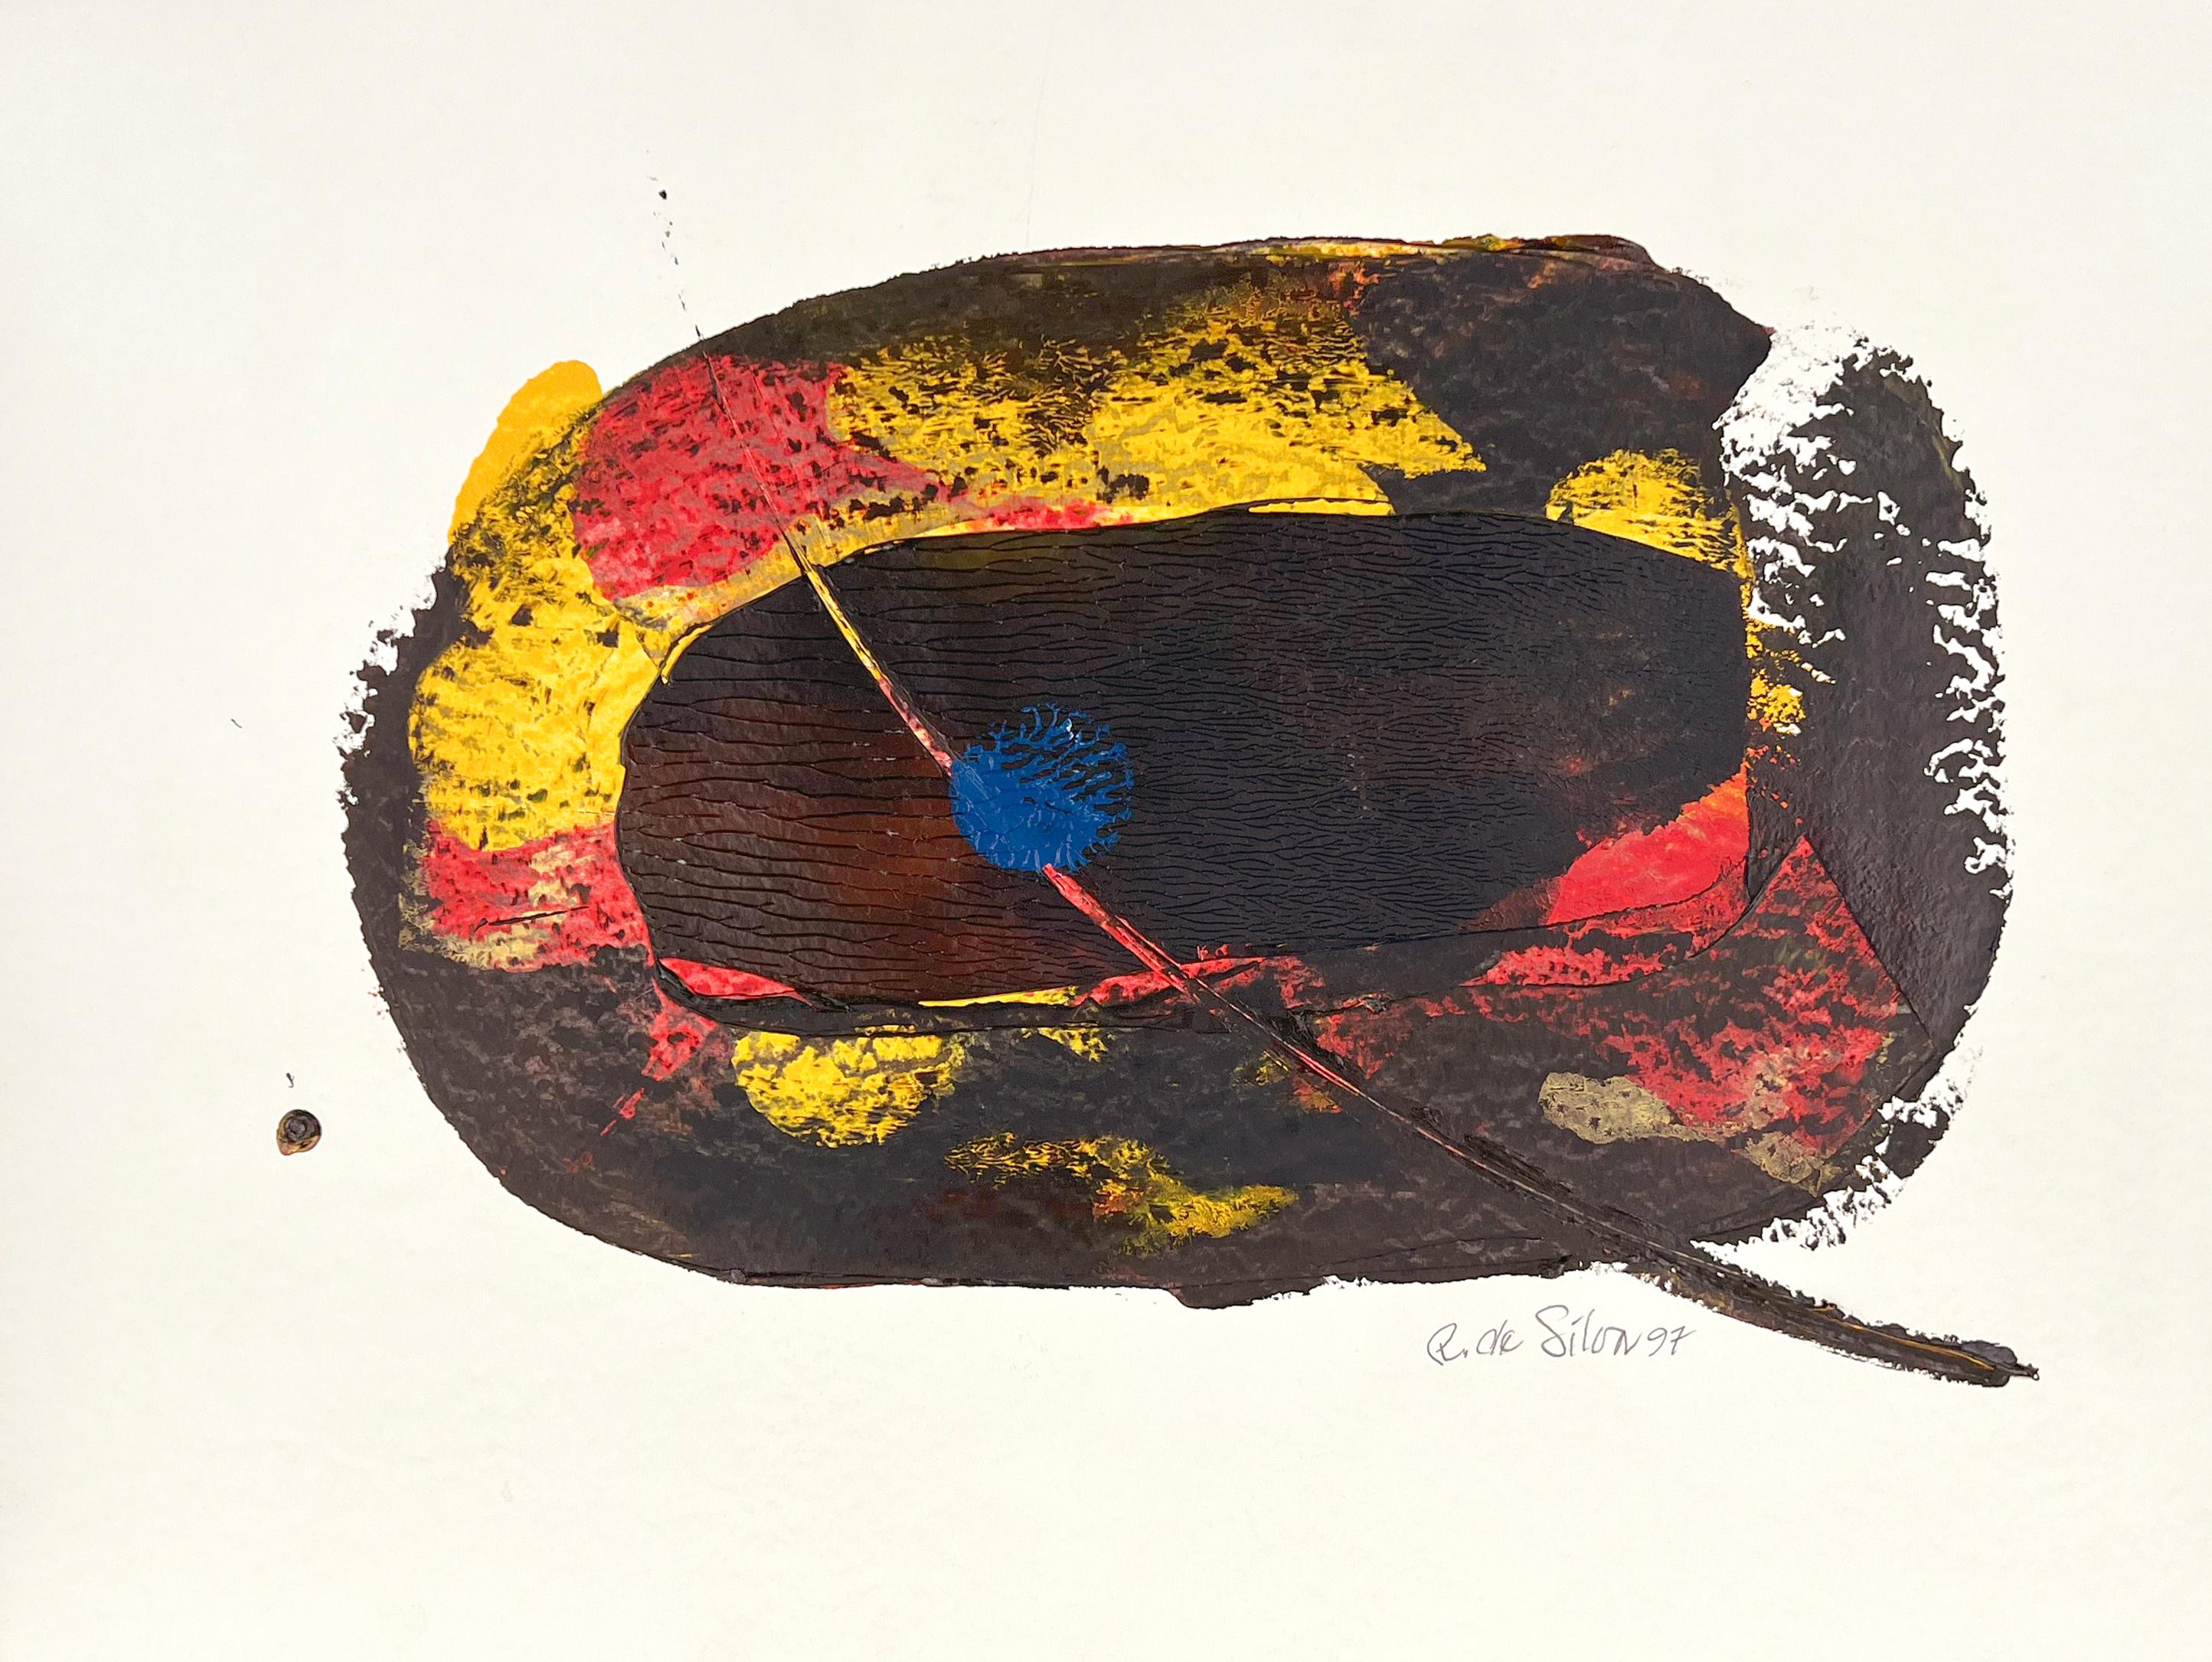 Yellow Red Umber in Oil on Paper - Painting by Ricardo de Silva